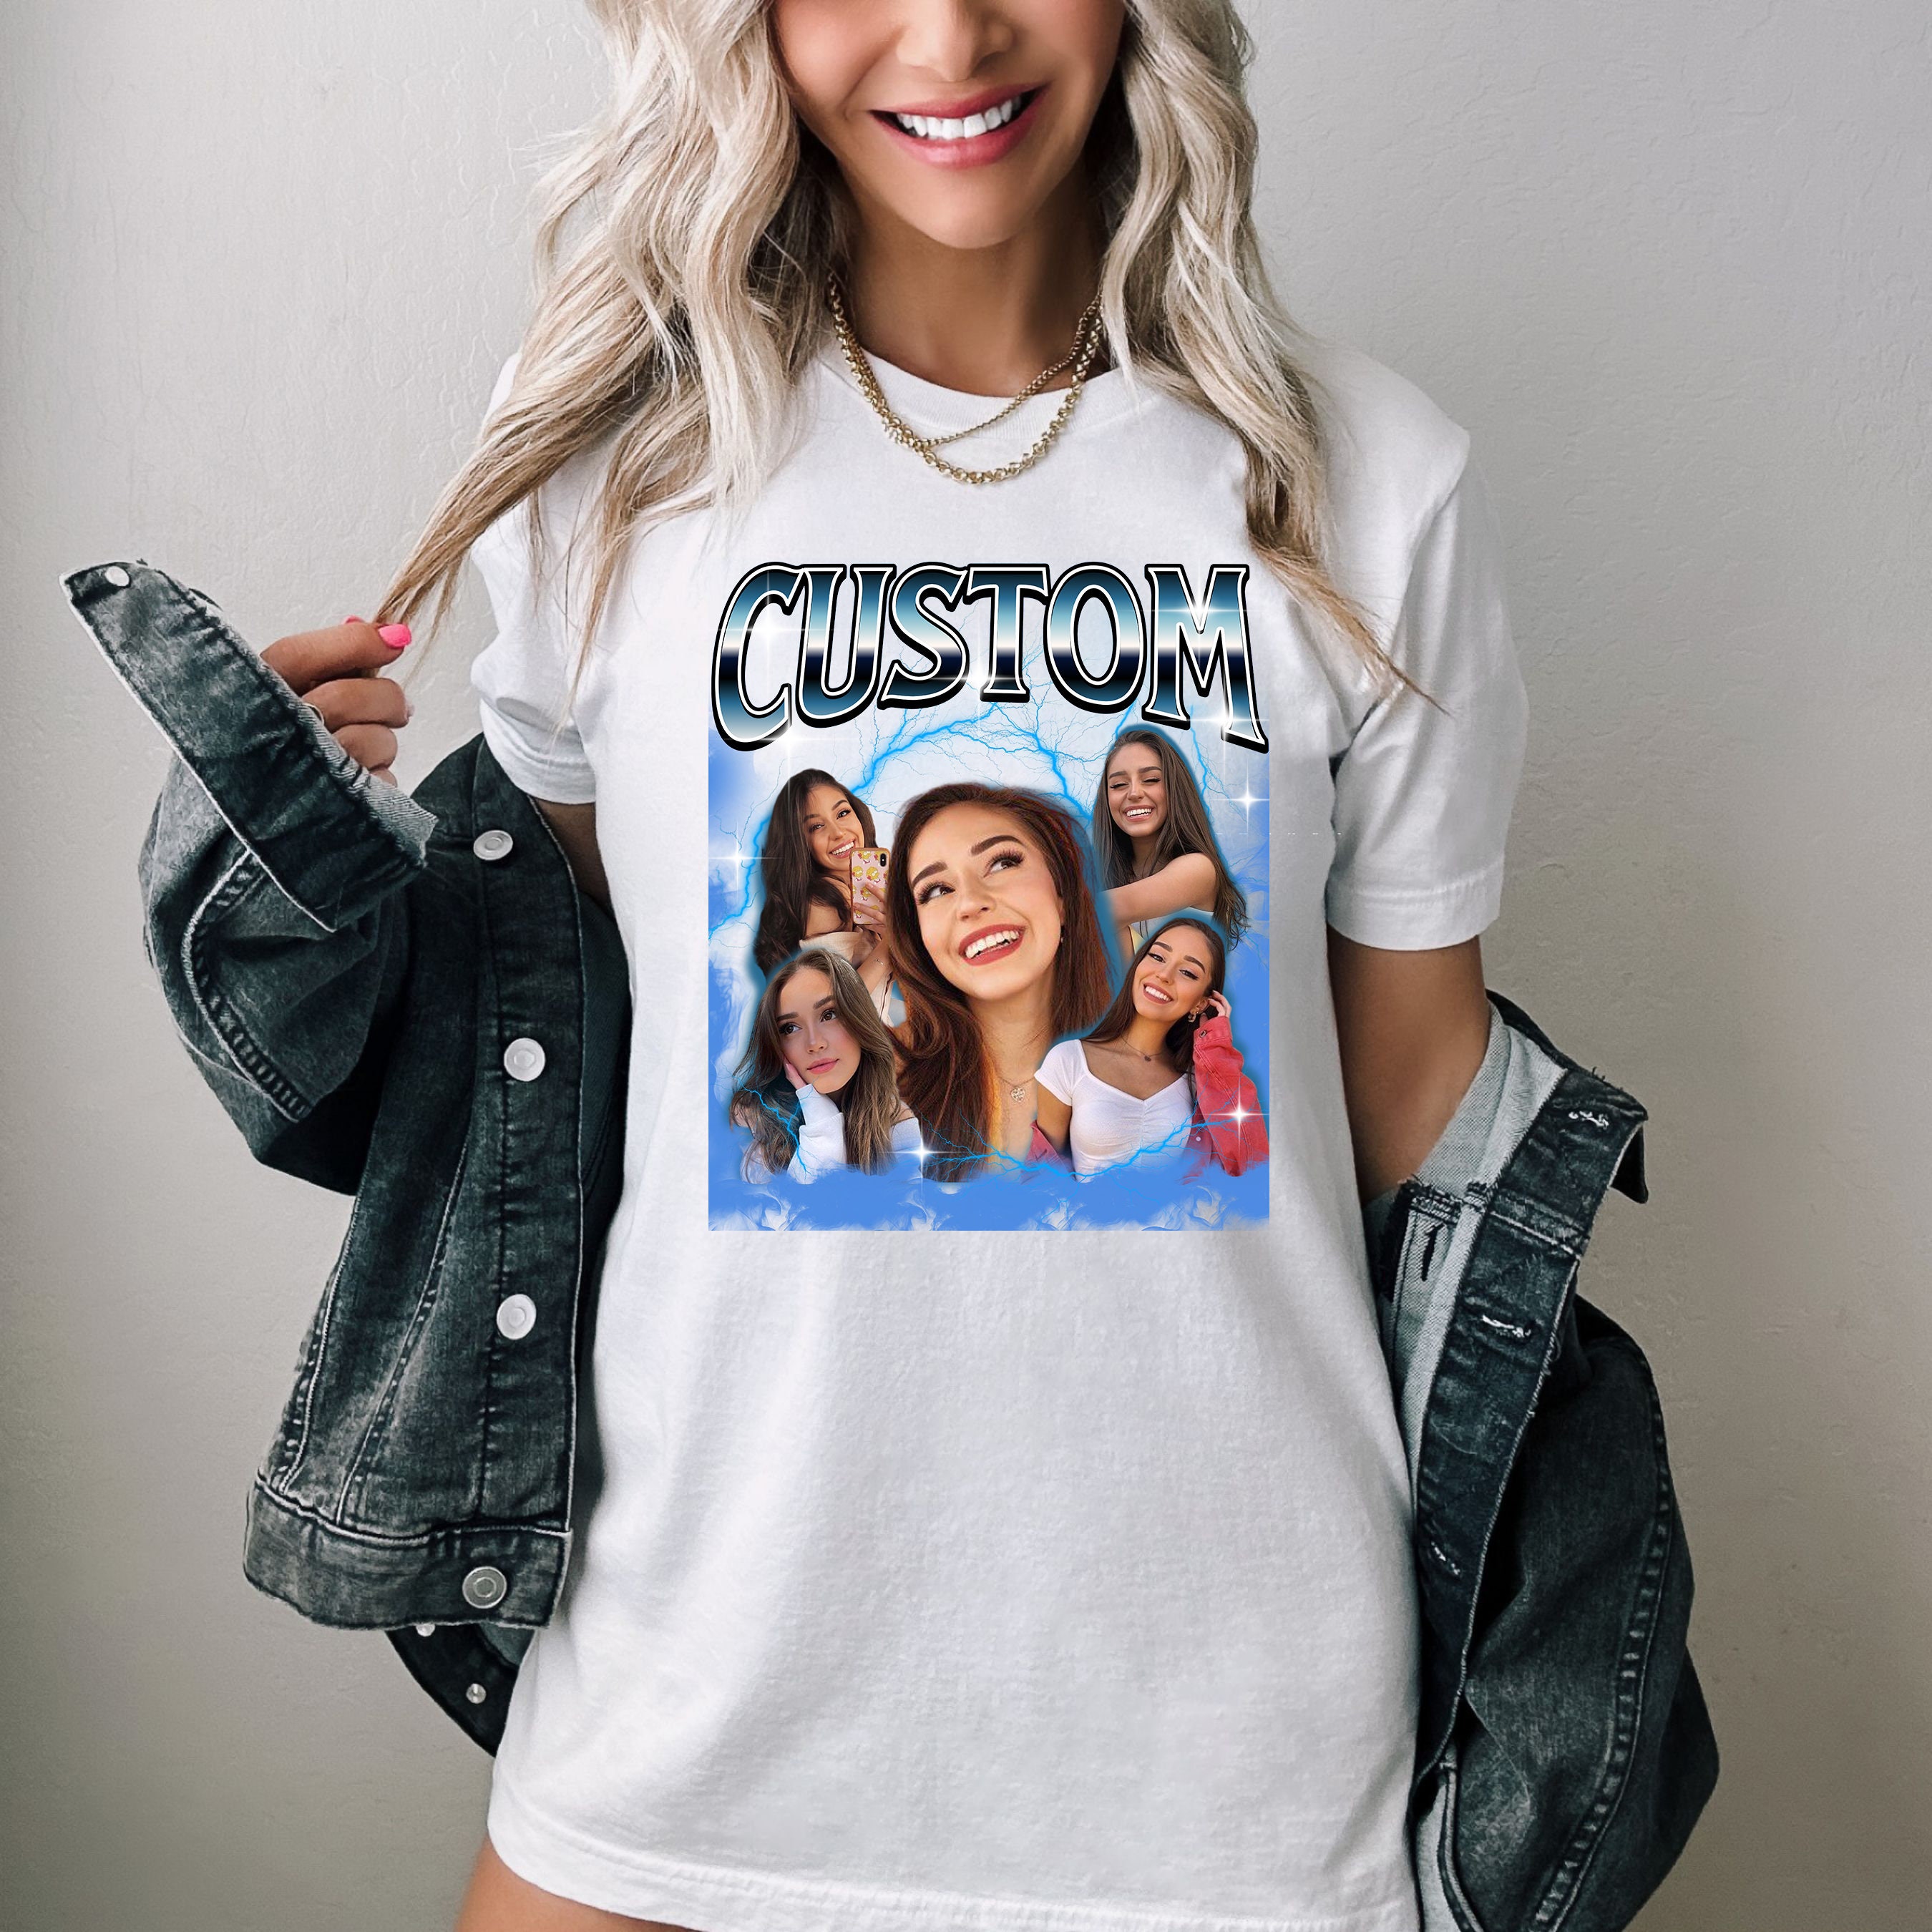 Custom Bootleg Rap Tee, 90s Vintage Bootleg Shirt, Shirt with Face Photo Vintage T Shirts, Bachelorette Surprise, Personalized Birthday Gift